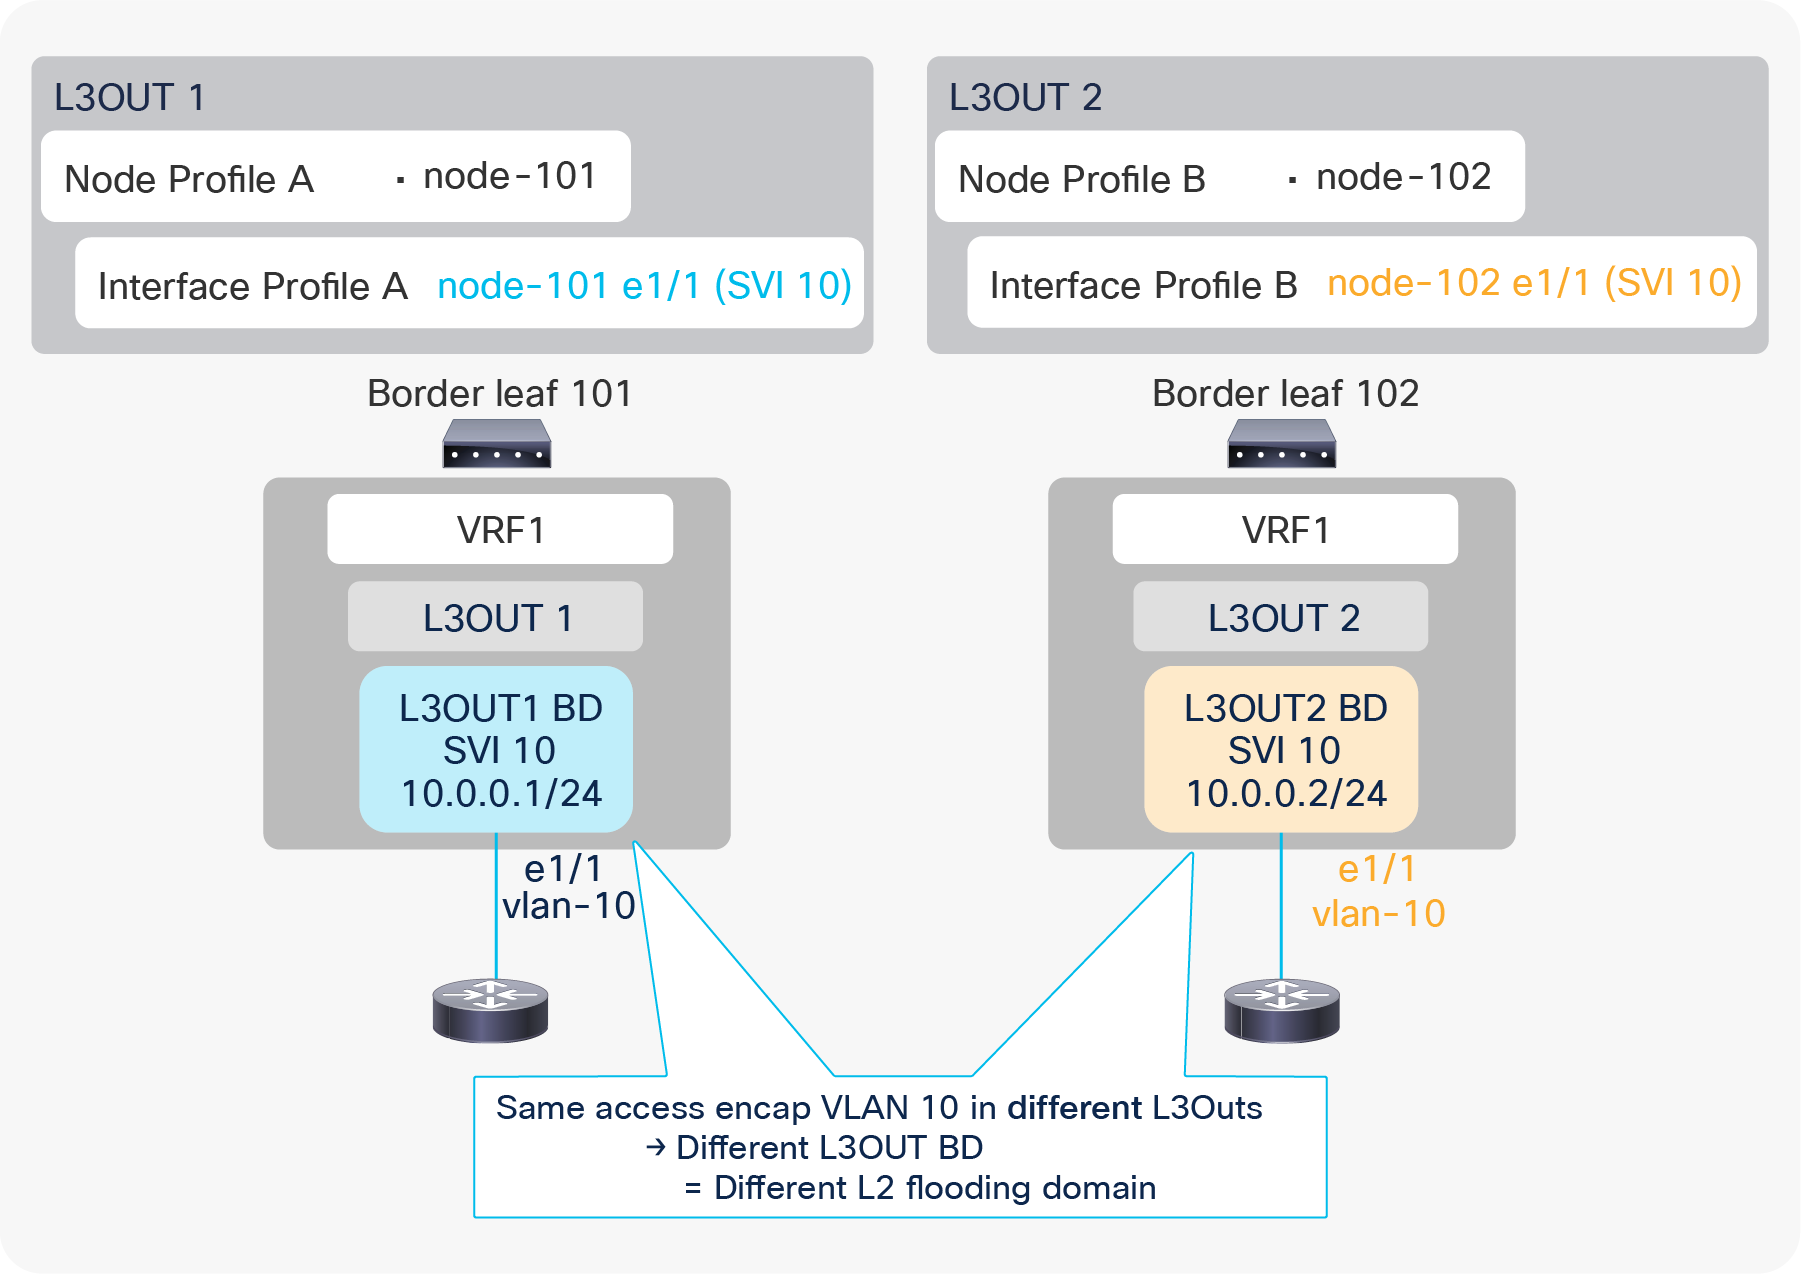 L3Out BD and access-encap VLAN (in different L3Outs)